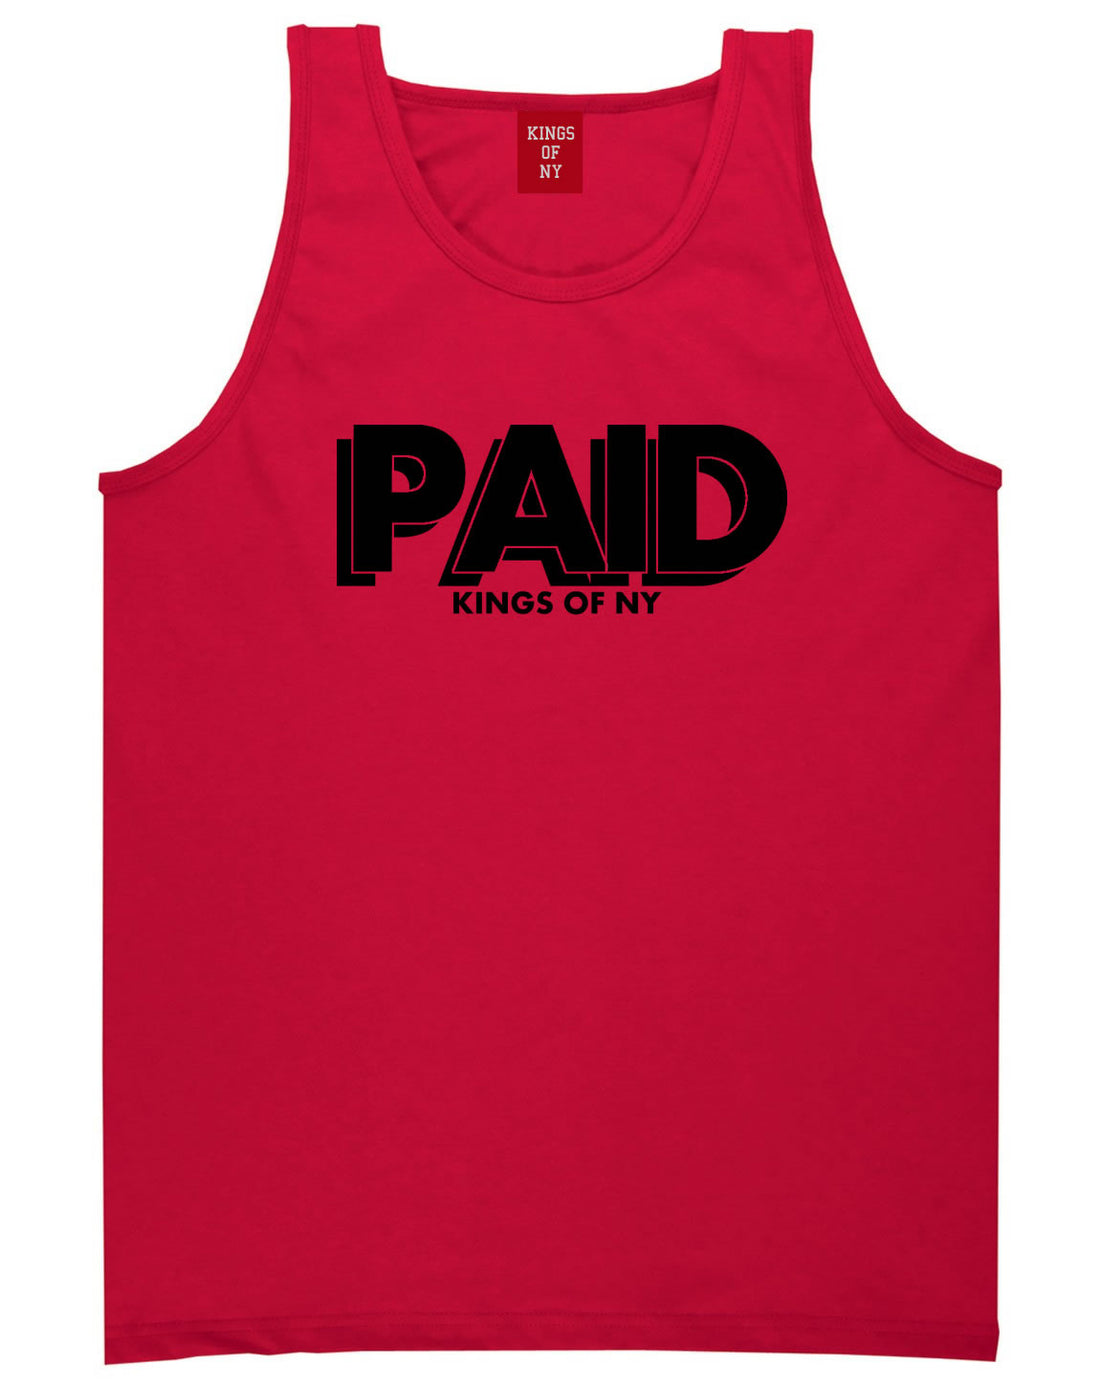 PAID Kings Of NY W15 Tank Top in Red By Kings Of NY